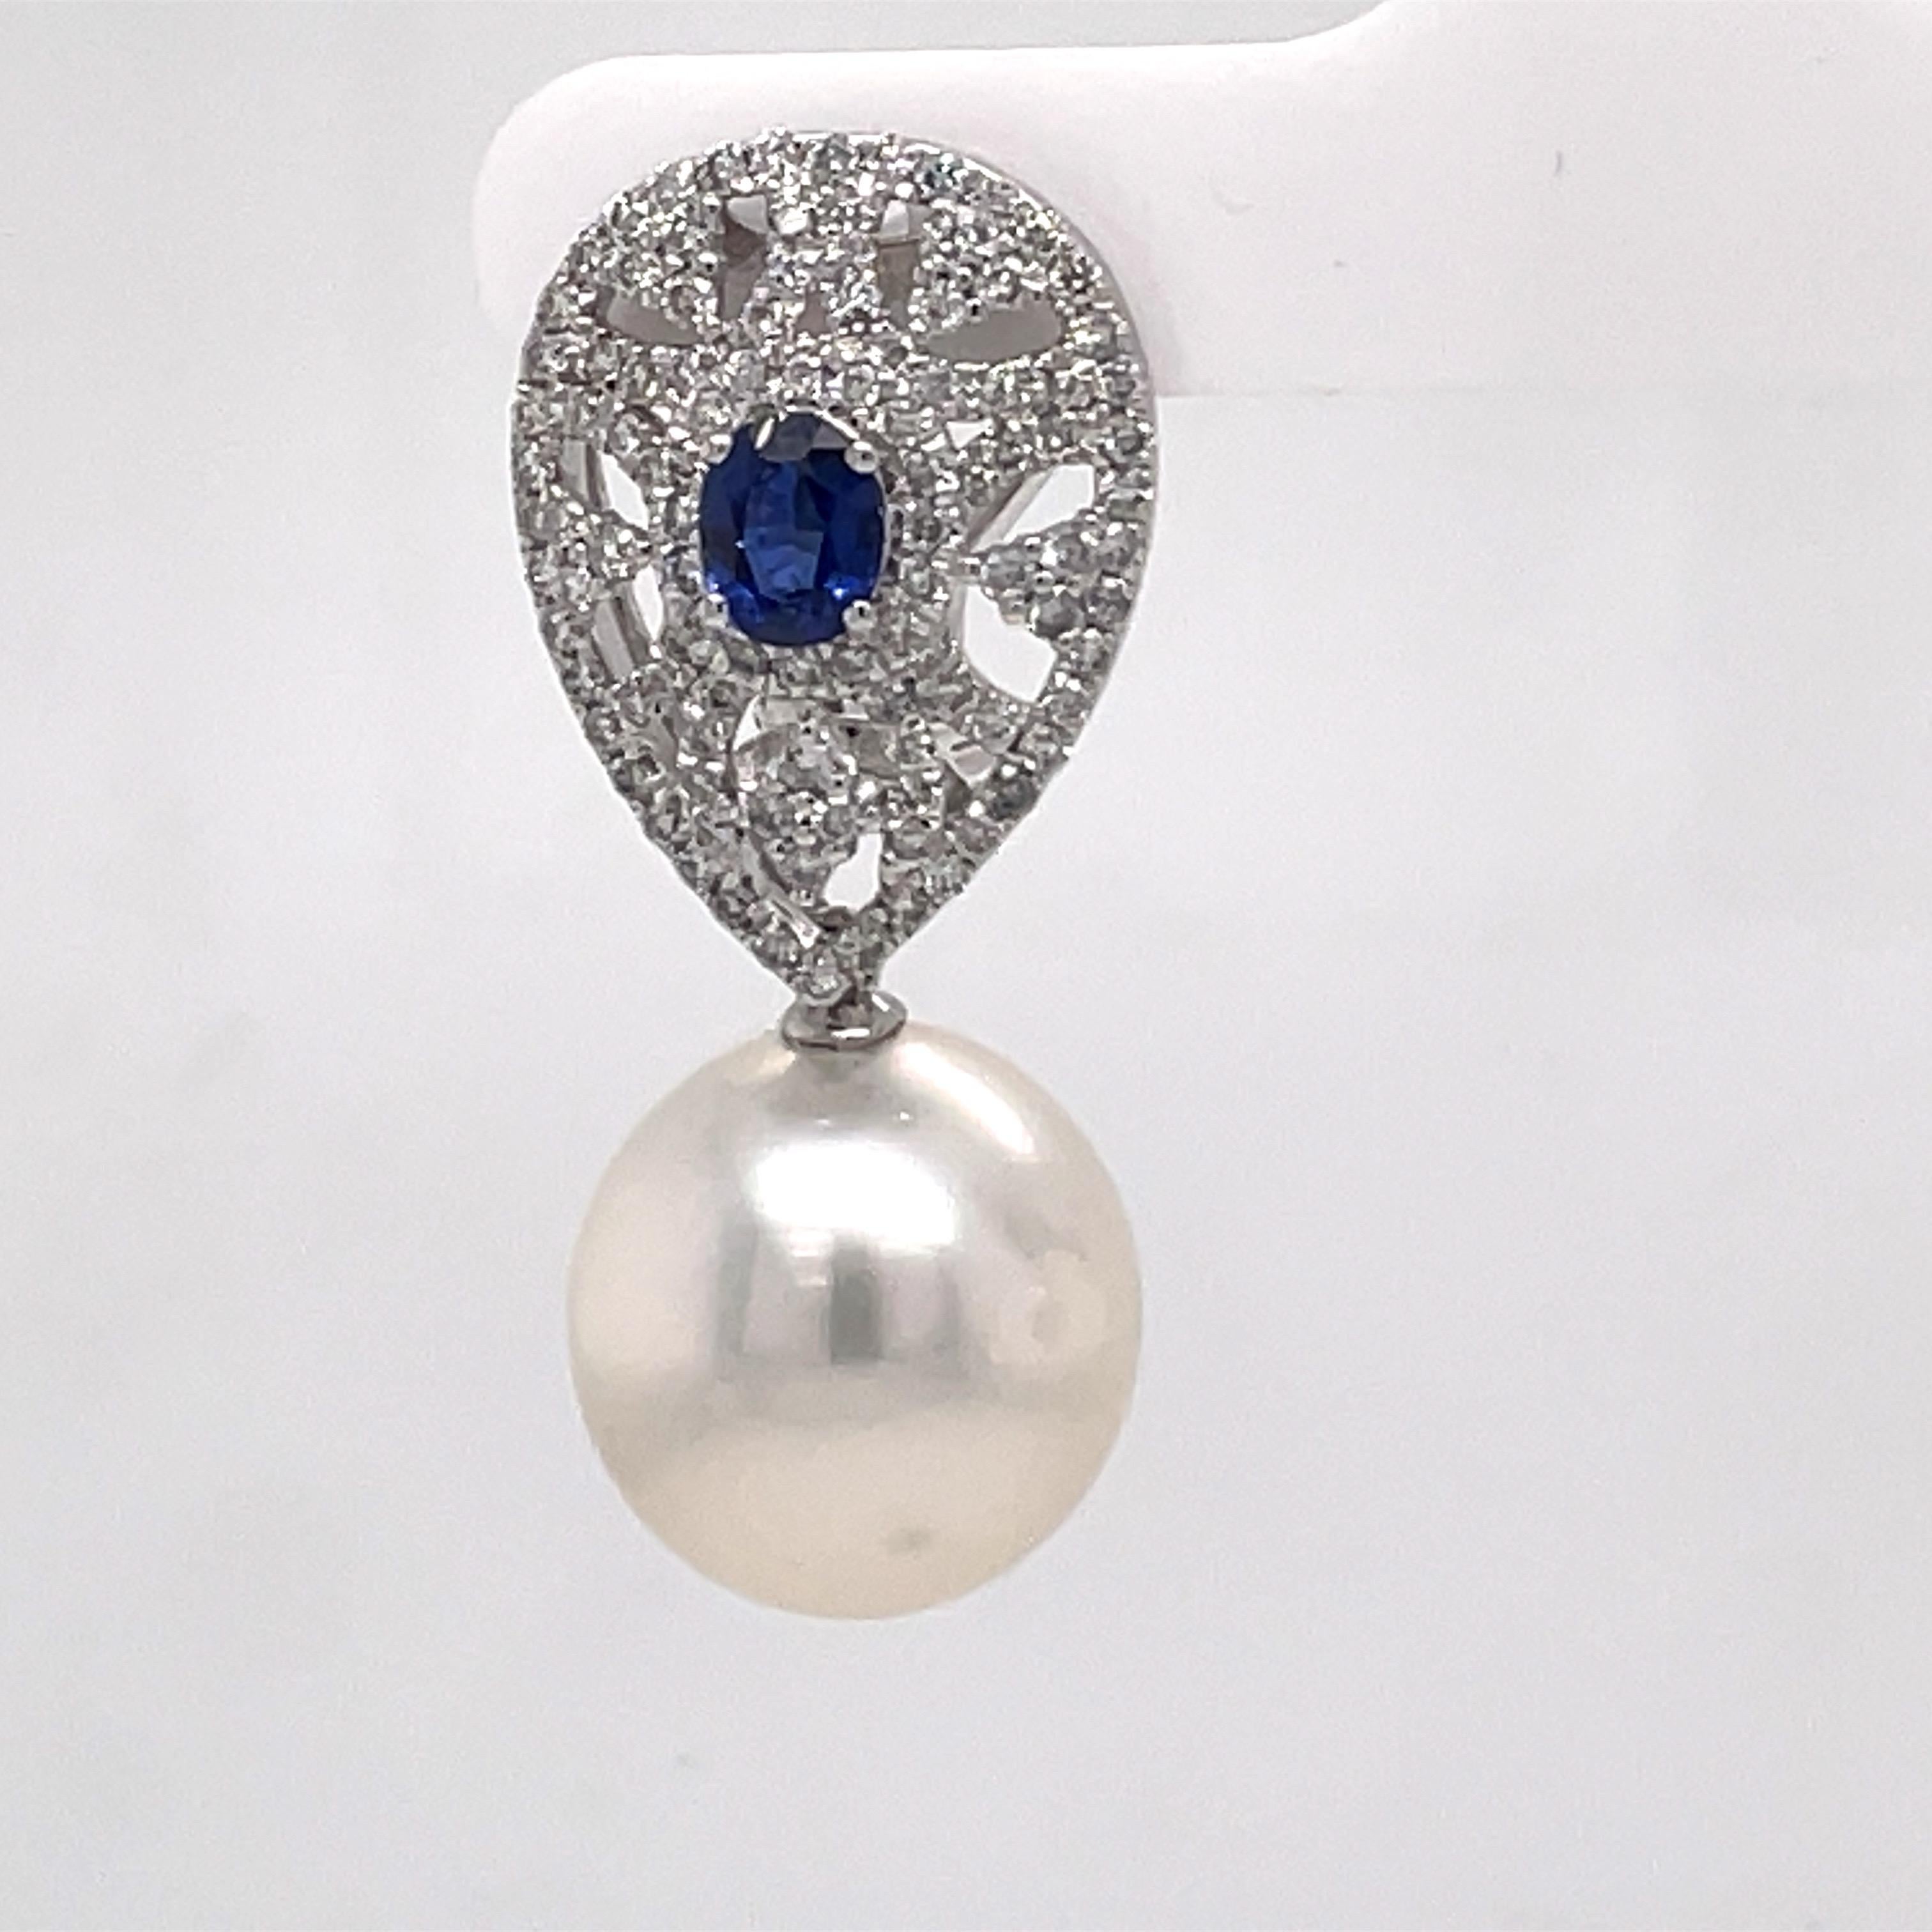 18 Karat White gold drop earrings featuring two blue Oval Cut Sapphires weighing 0.92 carats flanked with 208 round brilliants weighing 1.24 carats and two South Sea Pearls measuring 13-14 MM.
Color G-H
Clarity SI